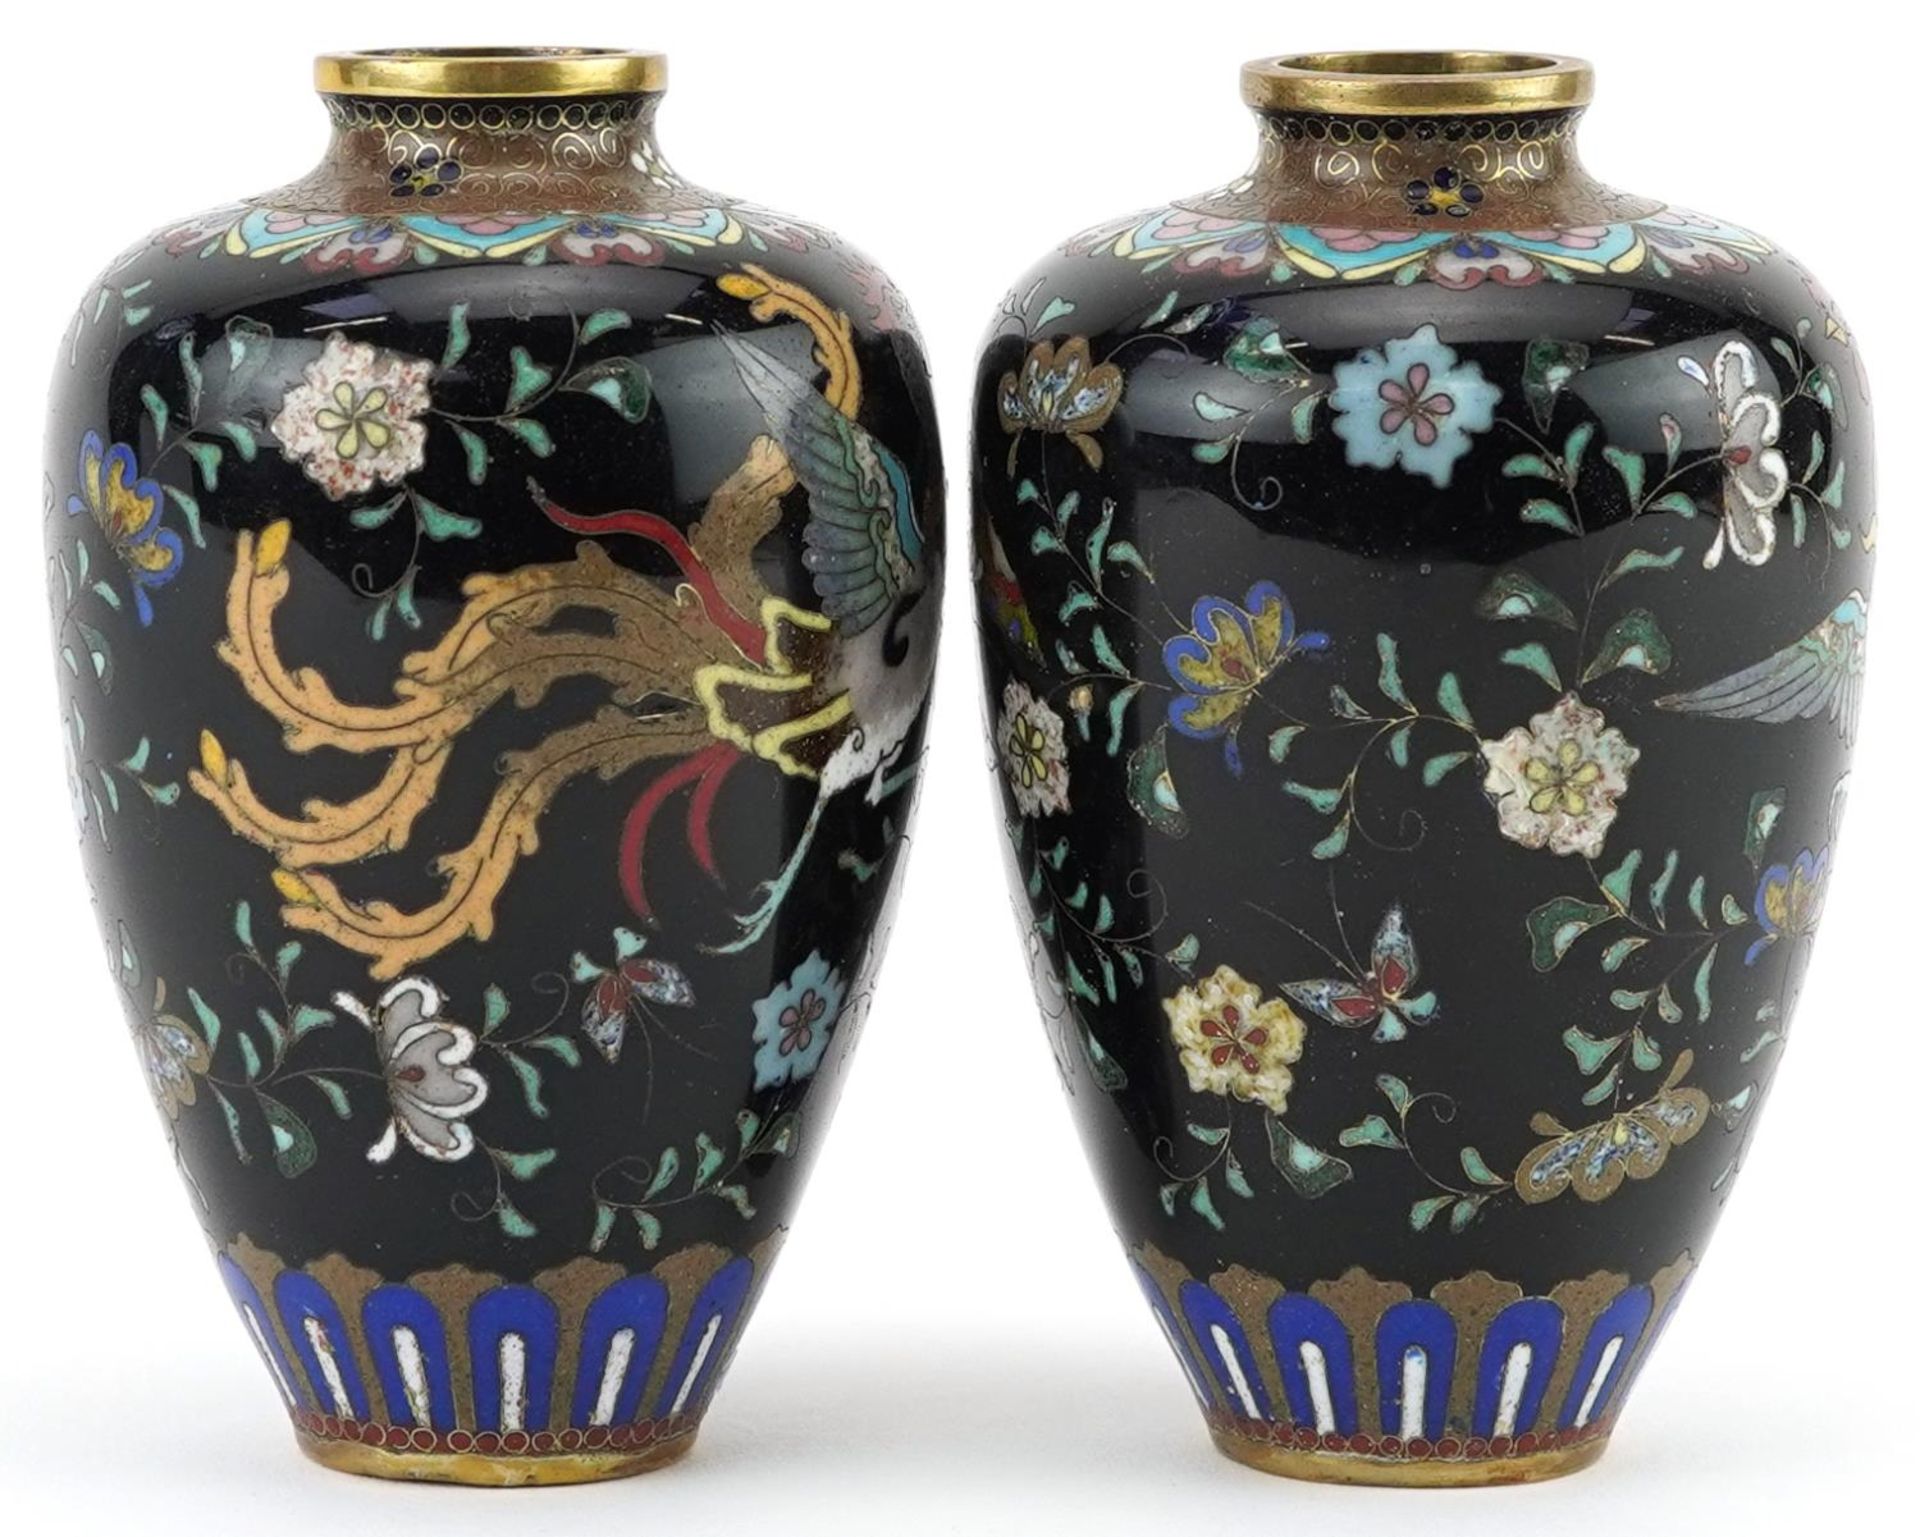 Pair of Japanese cloisonne vases, each enamelled with a mythical bird amongst flowers, each 9cm high - Image 4 of 6